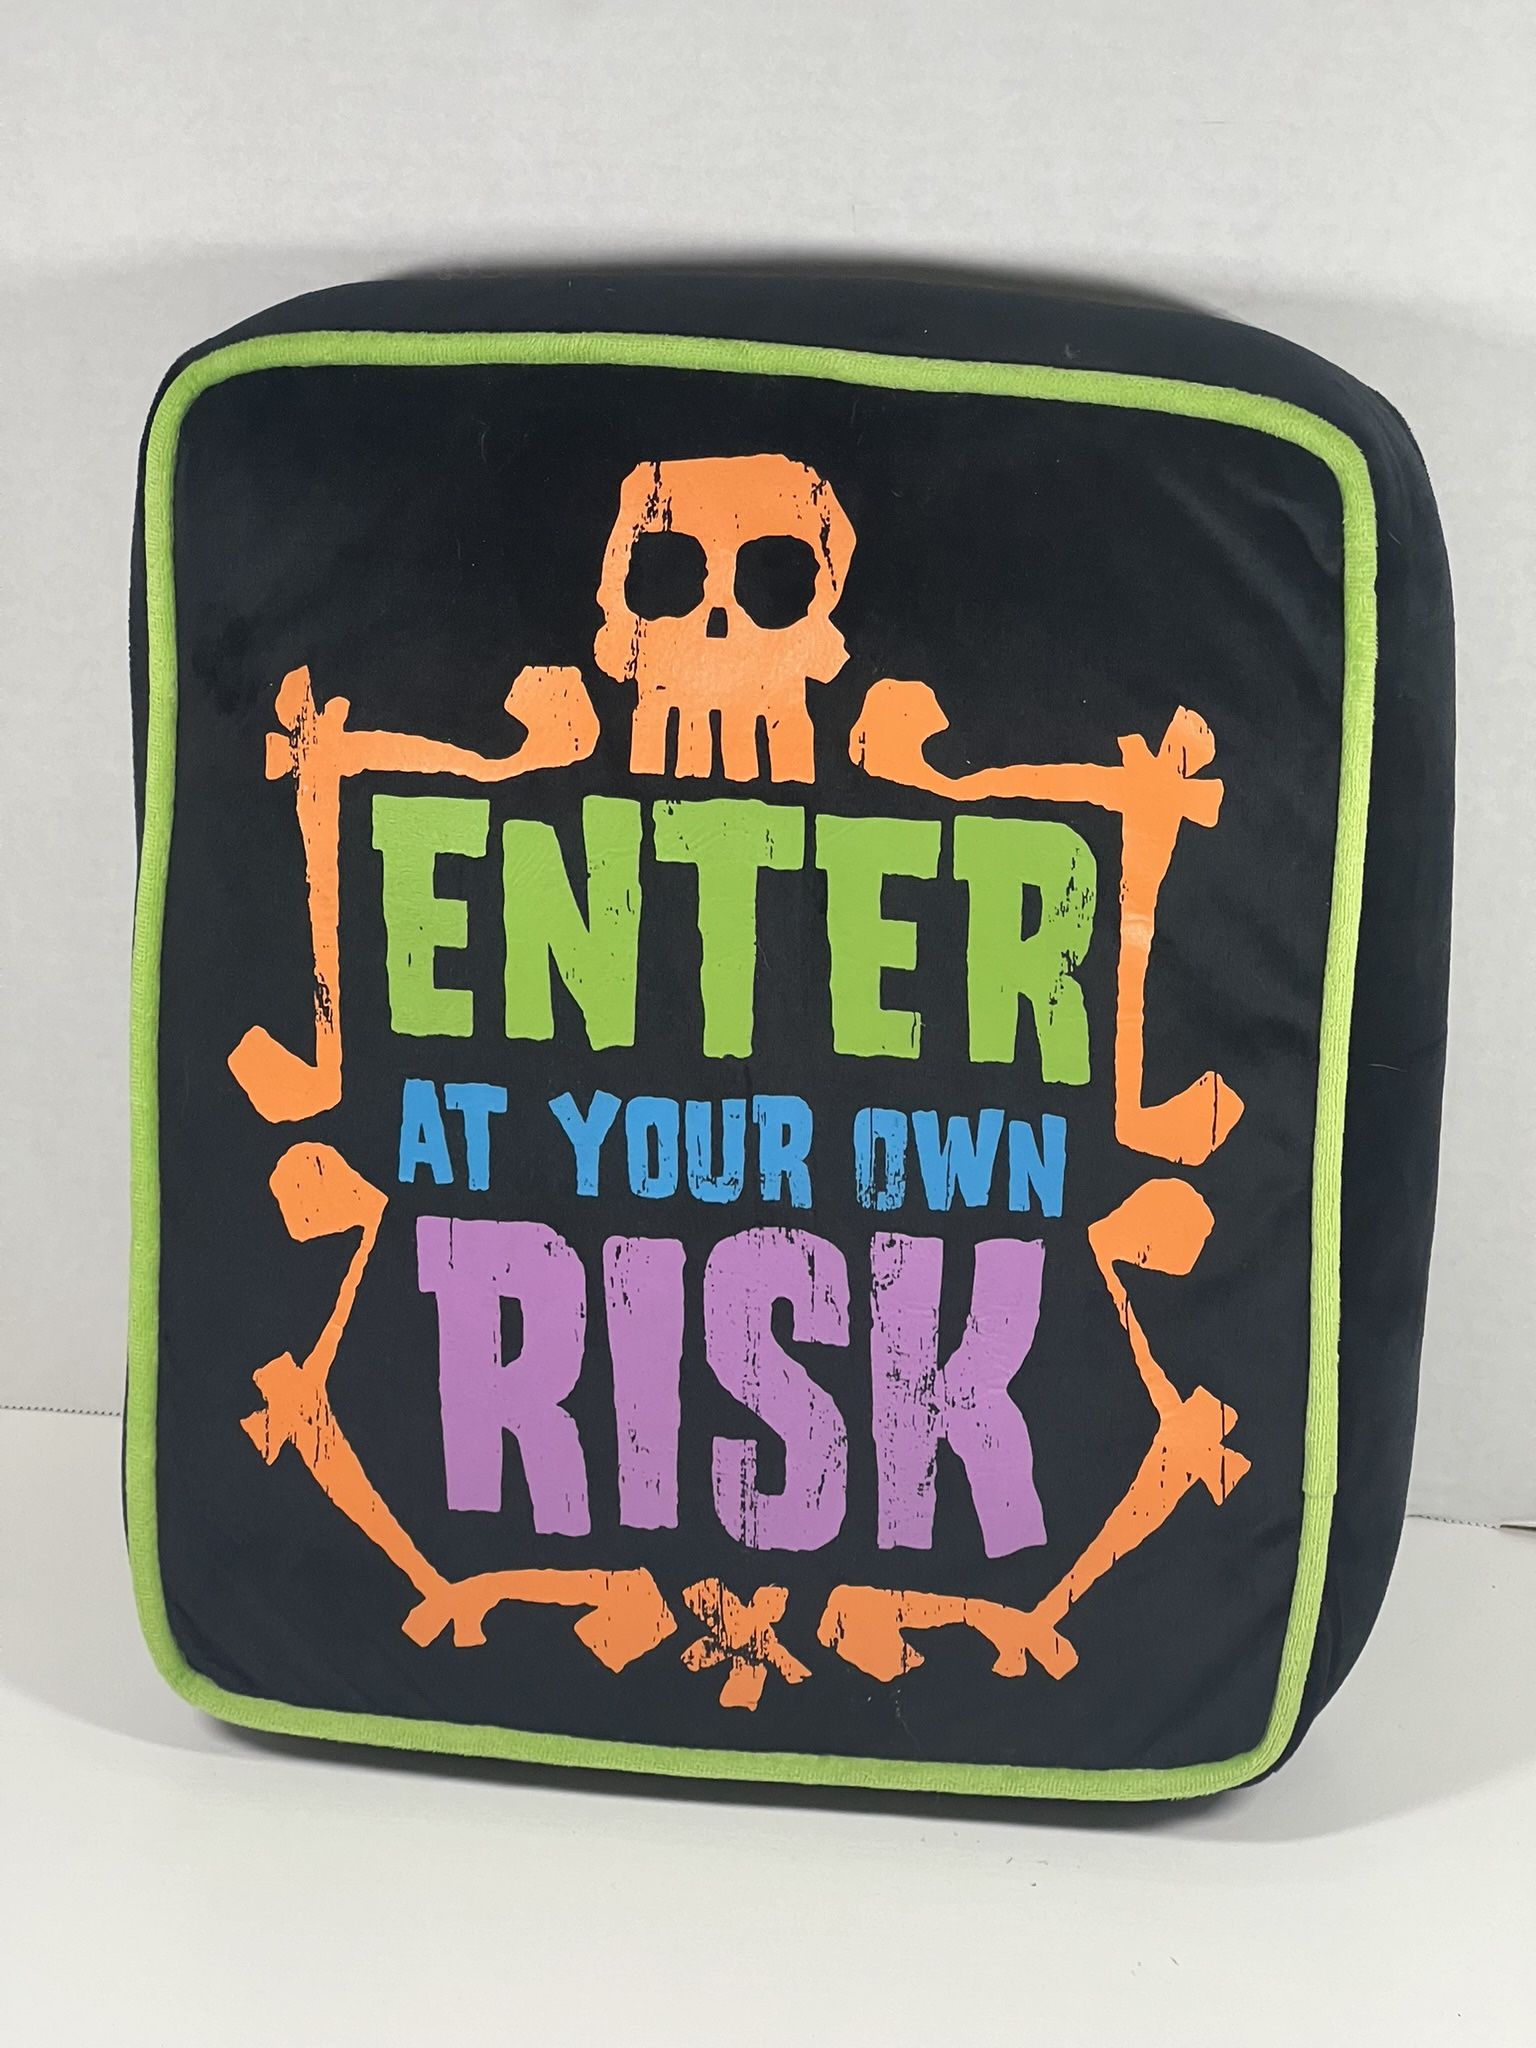 Halloween ENTER AT YOUR OWN RISK Decorative Throw Pillow